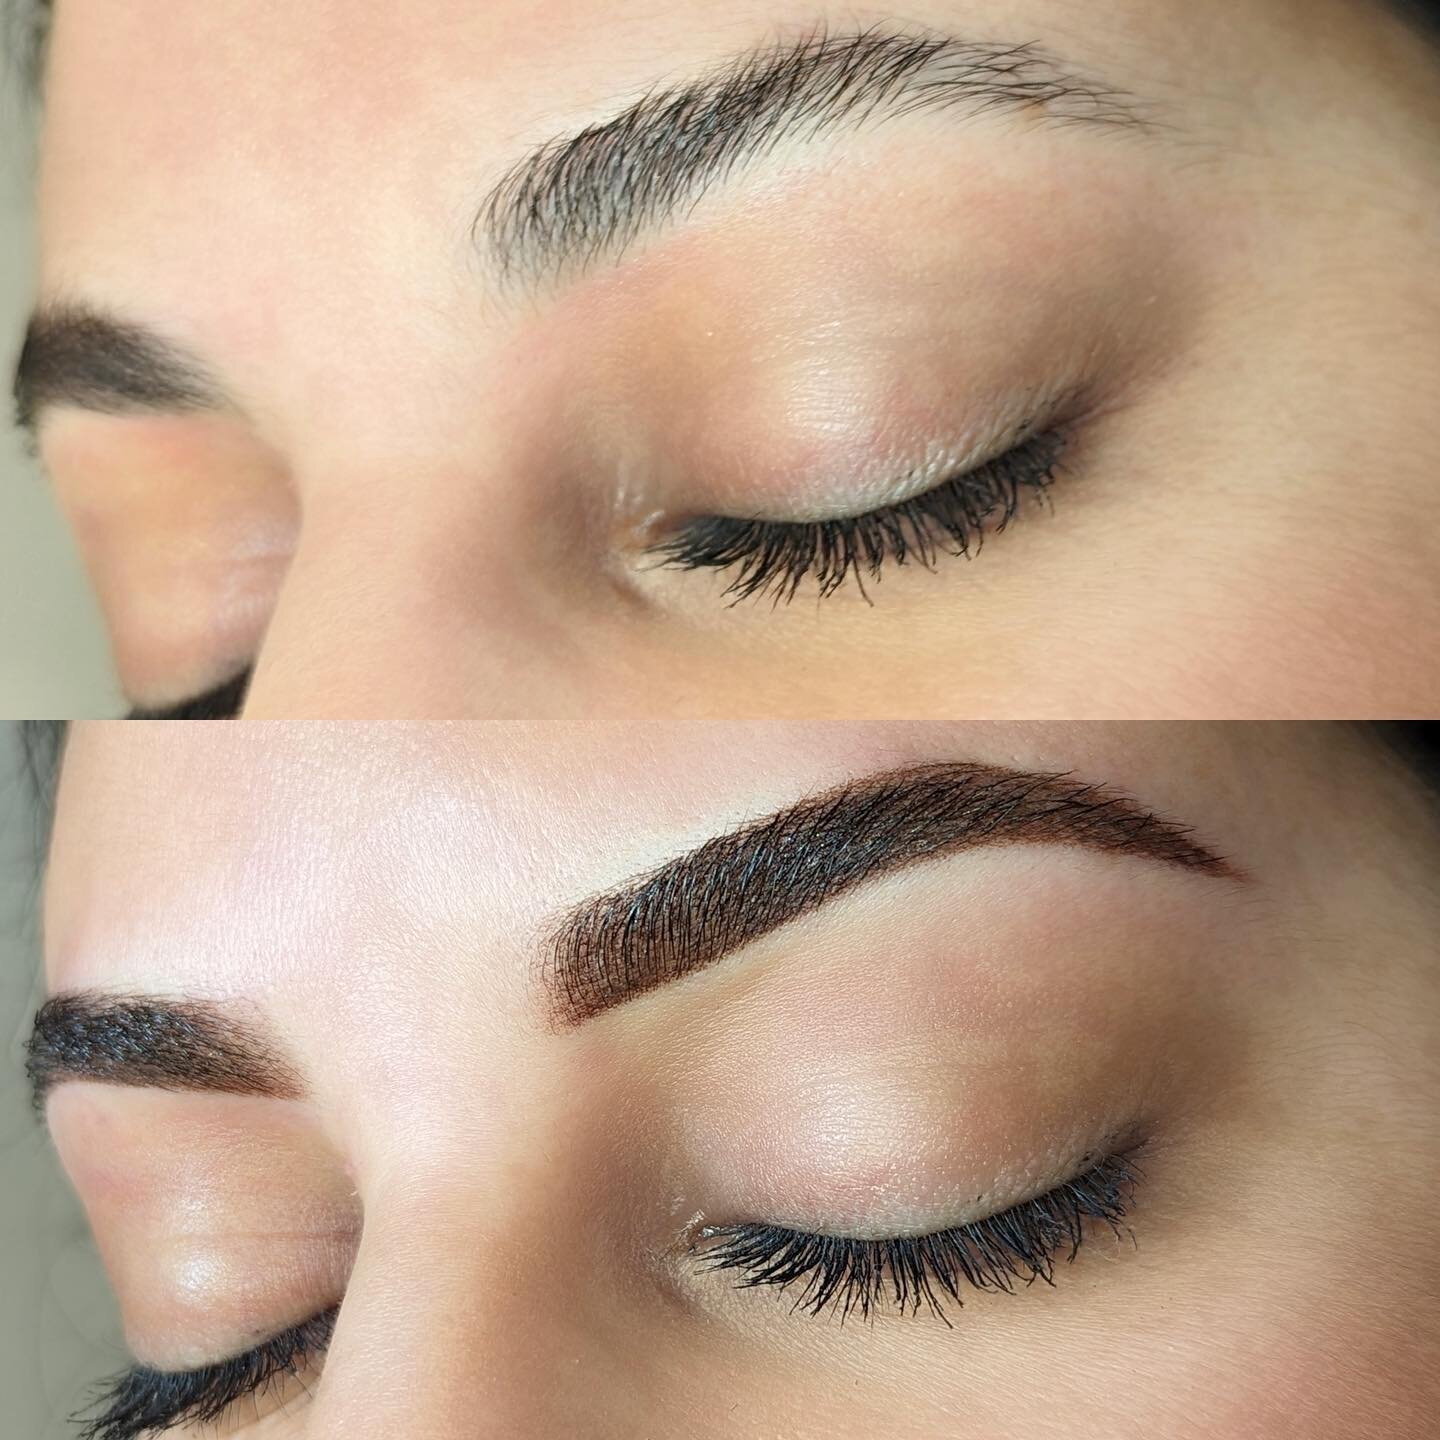 Ombr&eacute; brows before and right after first session ✨
.
.
.
.
.

#ombretattoo #ombrebrows #microshading #browgoals #permanentmakeup #igdaily #permablend #YesTinaDavies #permablendpigments #pmu #3dbrows #browsonfleek #eyebrowtattoo #semipermanentm